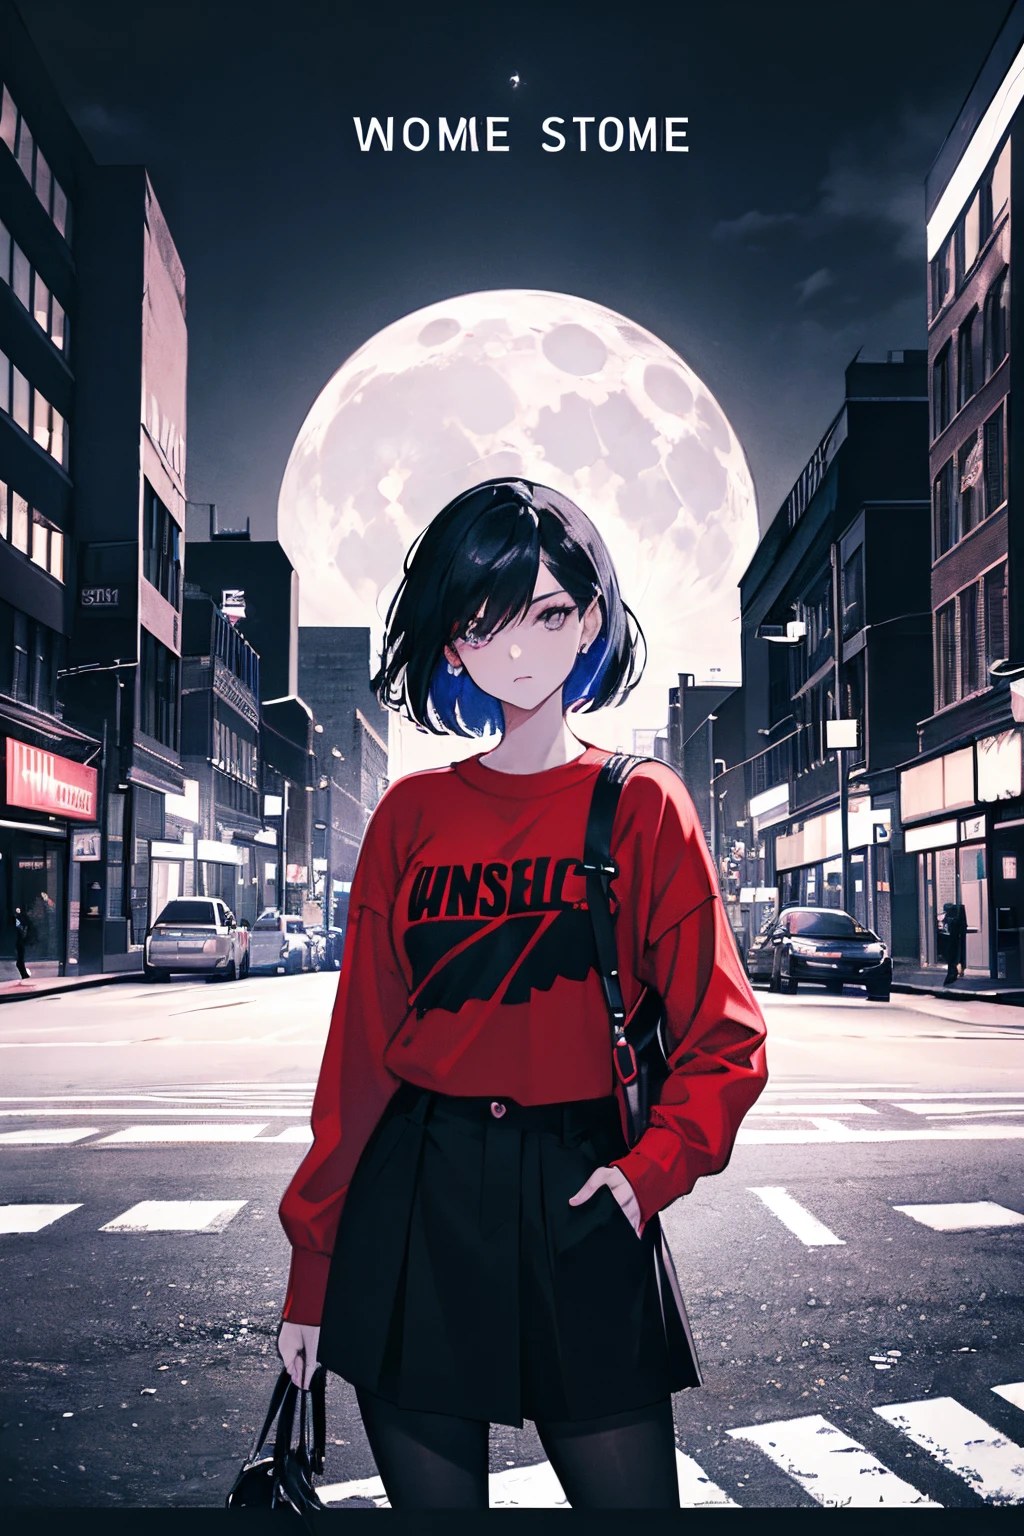 (moon in background),Movie Poster Style, Specific text, Strong color contrast, Stunning composition, bold and trendy, , which are full of confidence, street scene,english text, Bold fashion,Confident attitude,Women's Empowerment,Street style, Fashion,bold typography,high,Contrast Color, Clothing,Eye-catching composition,The atmosphere of the cityscape,